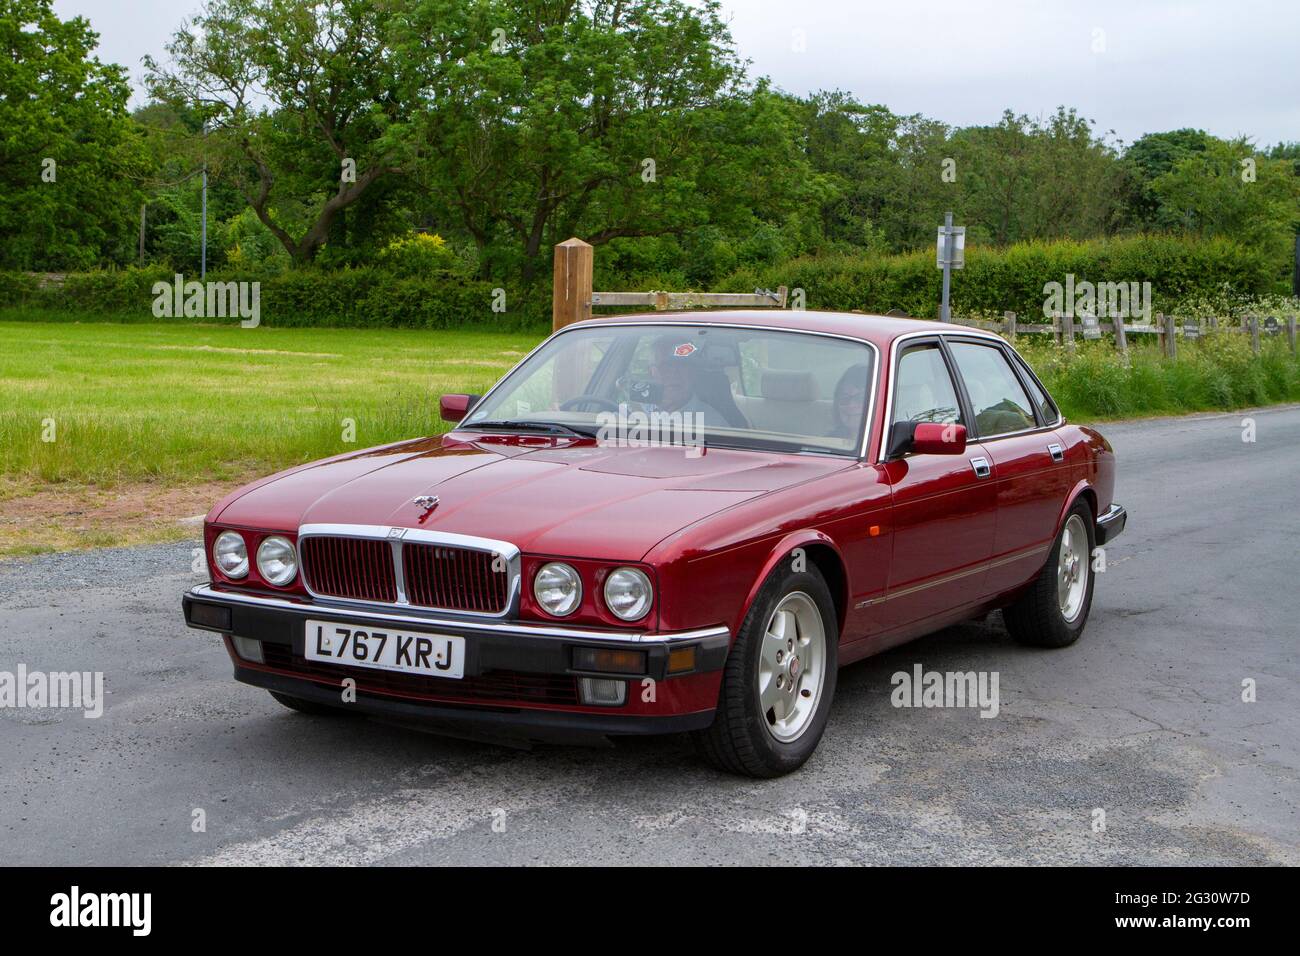 1994 90s nineties red British Jaguar 4dr saloon at the 58th Annual Manchester to Blackpool Vintage & Classic Car Run The event is a ‘Touring Assembly’ Stock Photo